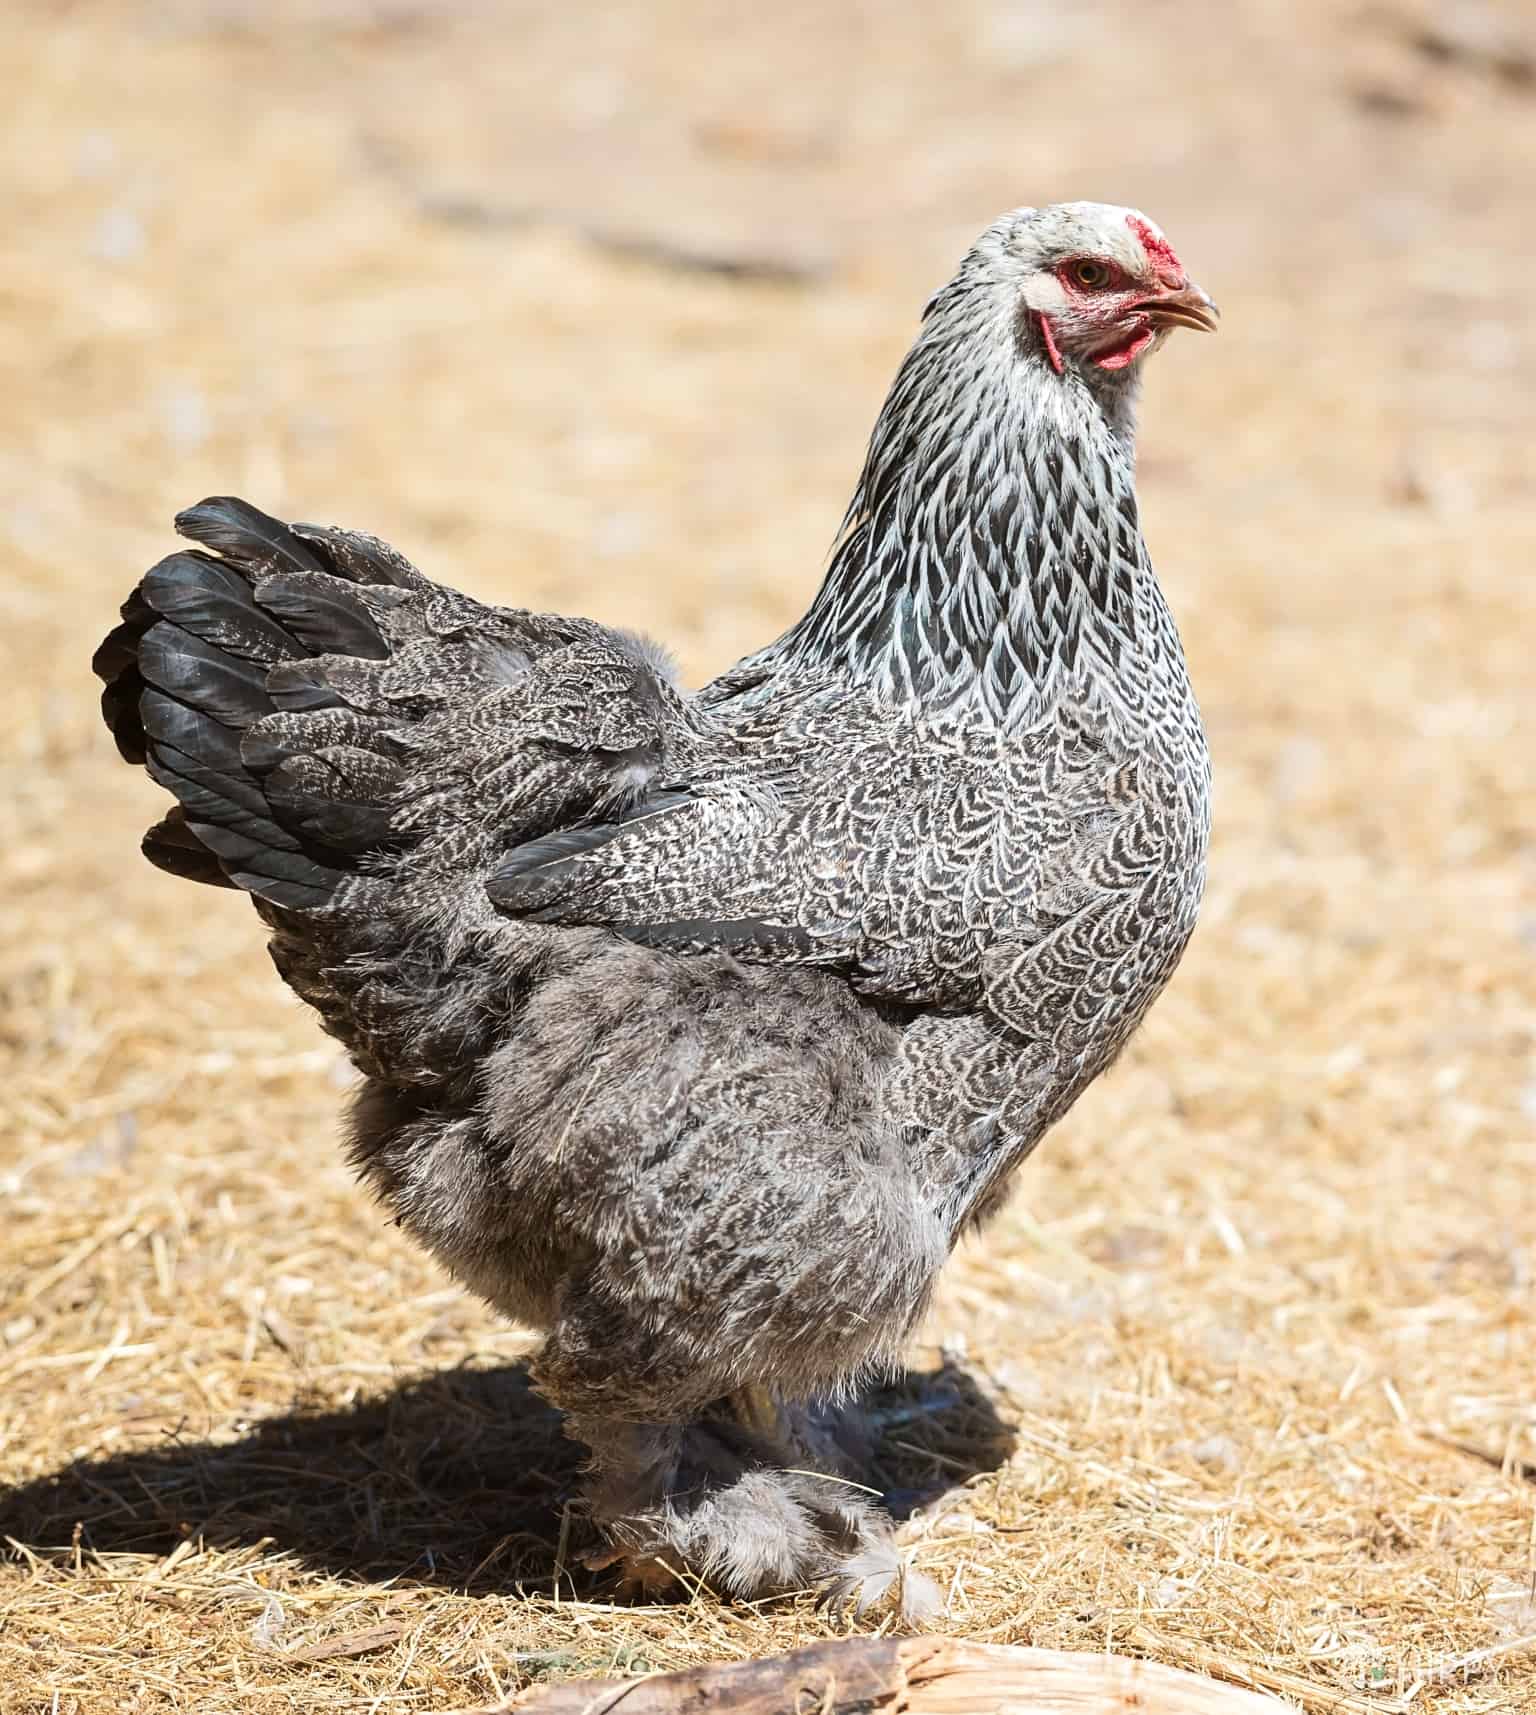 Brahma Chicken Breed - What You Need to Know